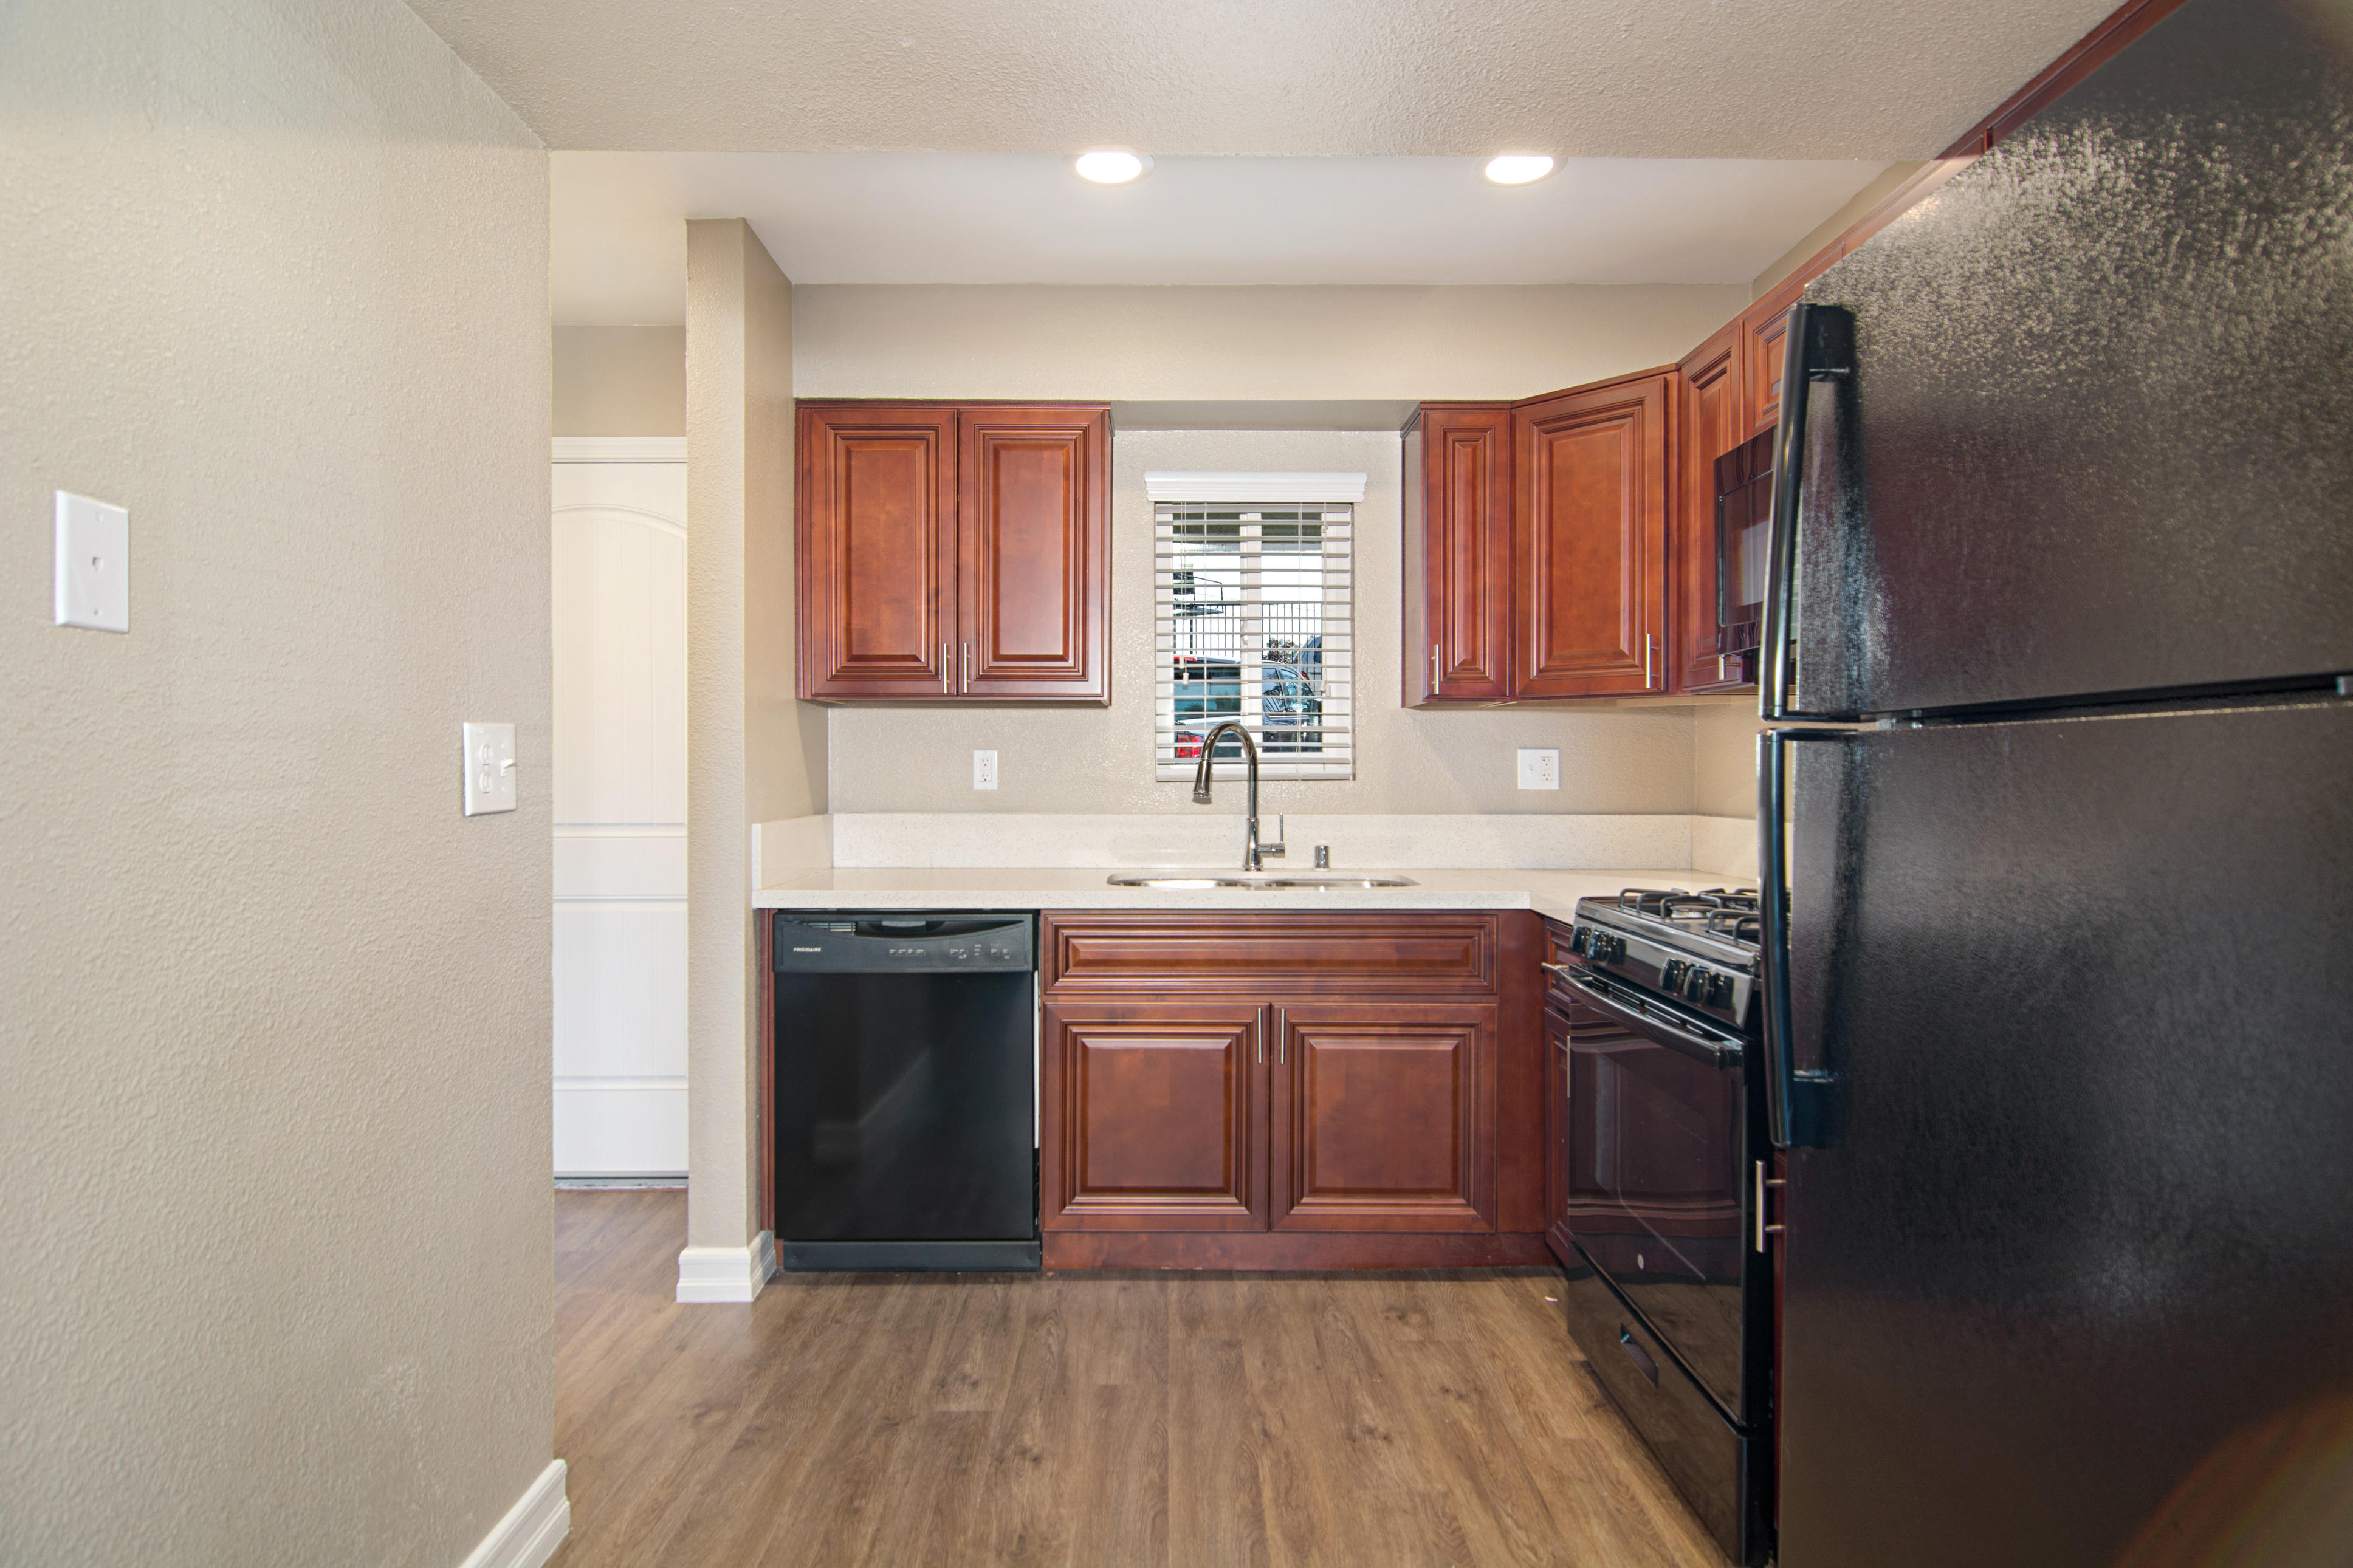 Kitchen with quartz counters, undermount sink, black appliances, and wood-style floors